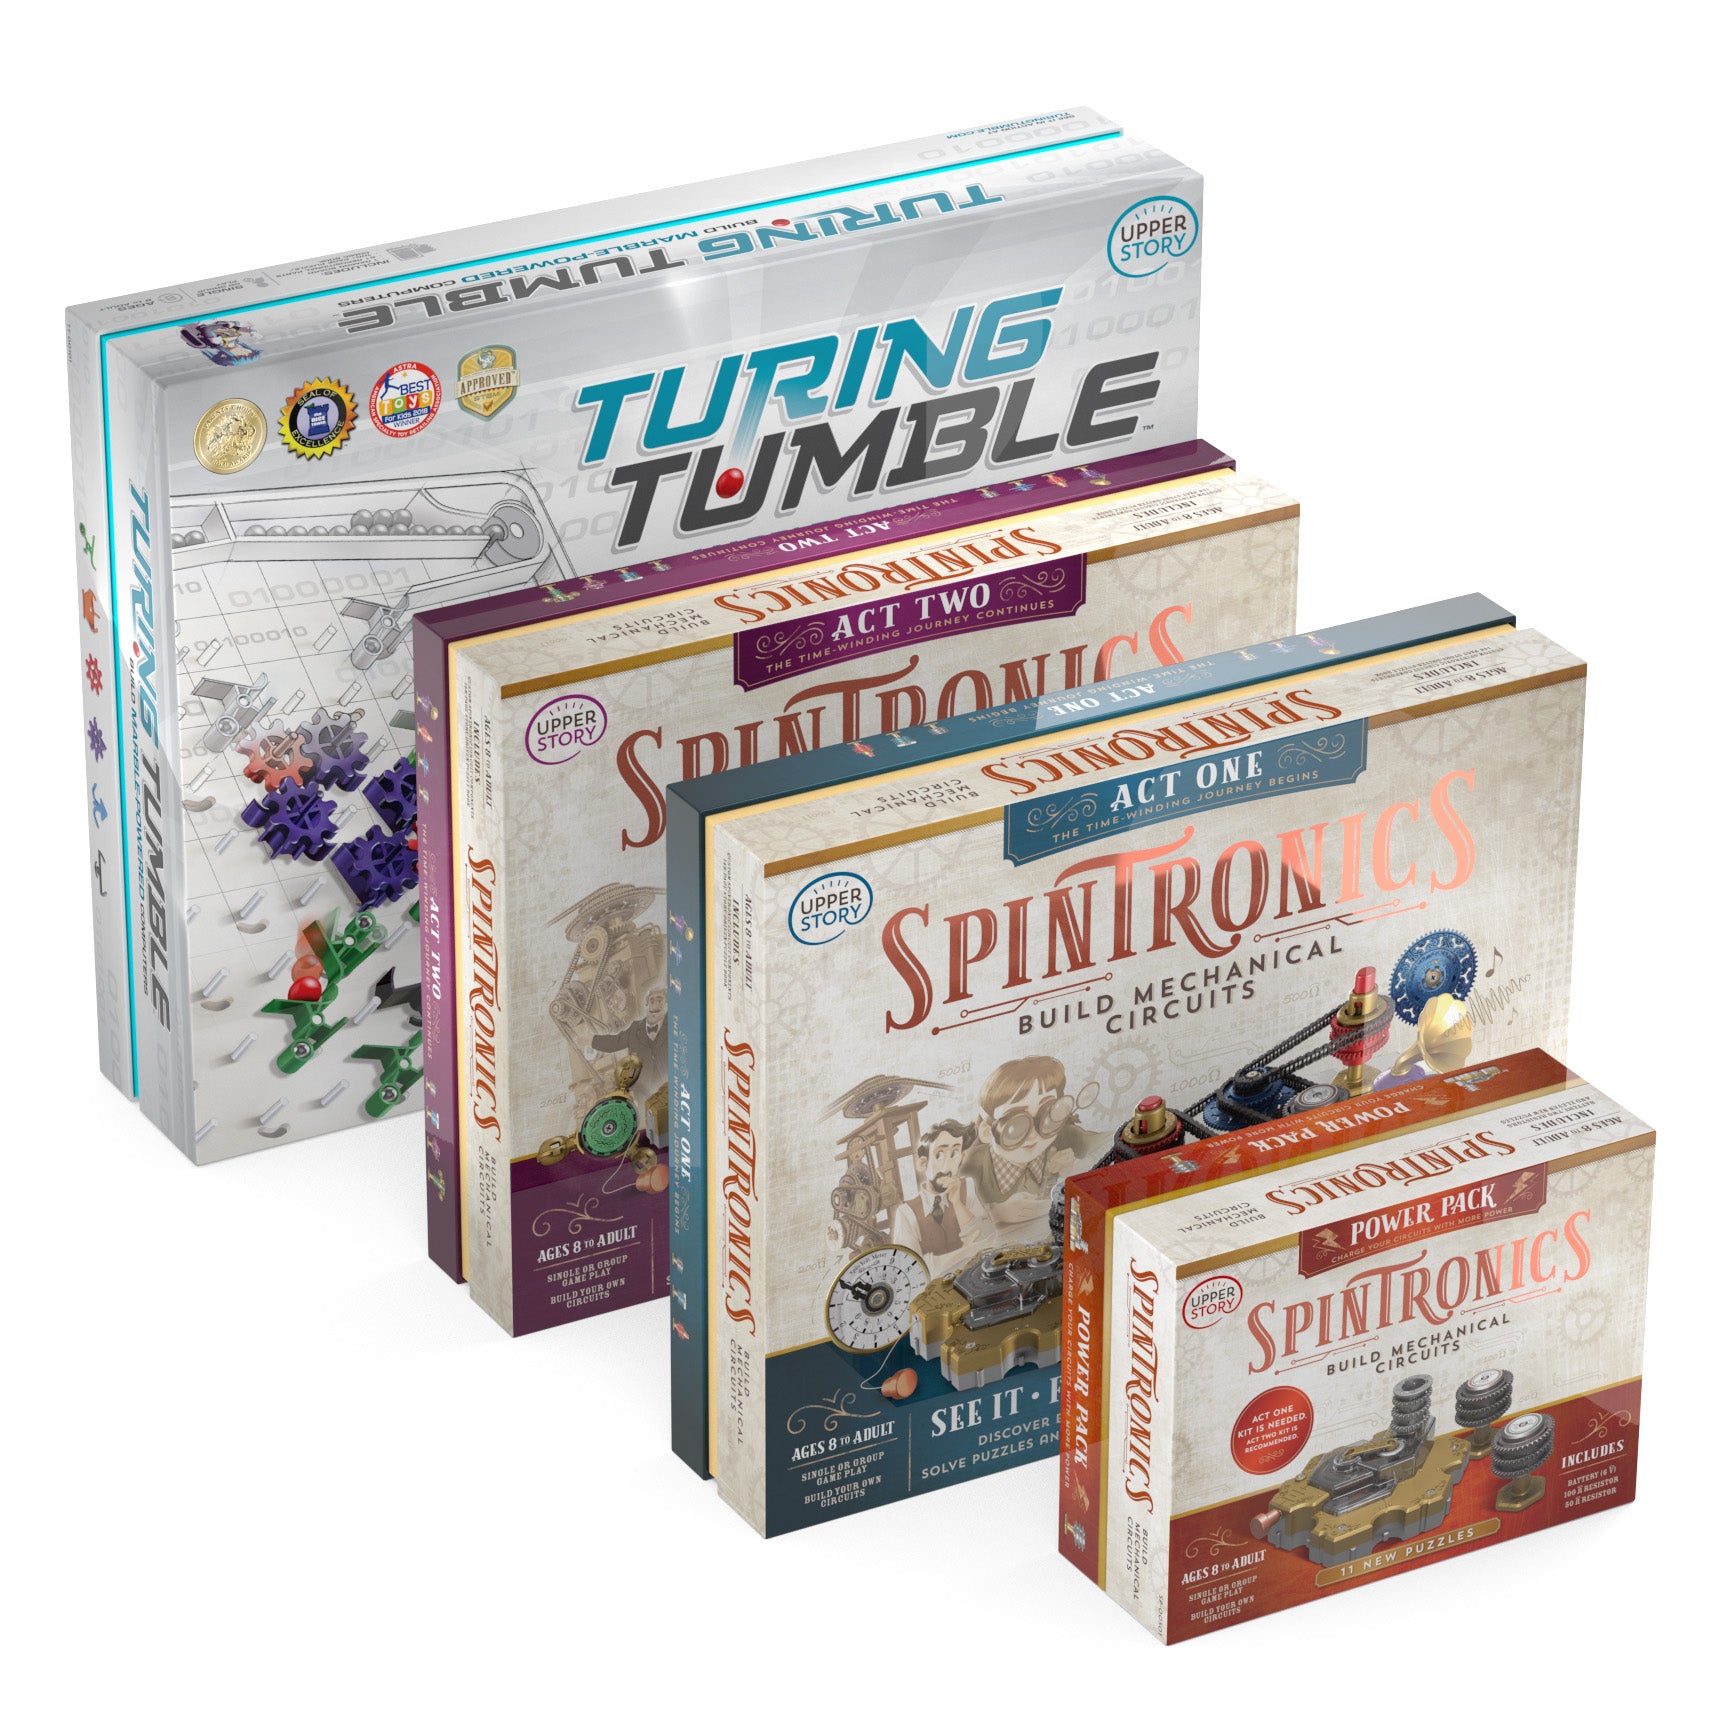 Turing Tumble Five-Pack – Upper Story